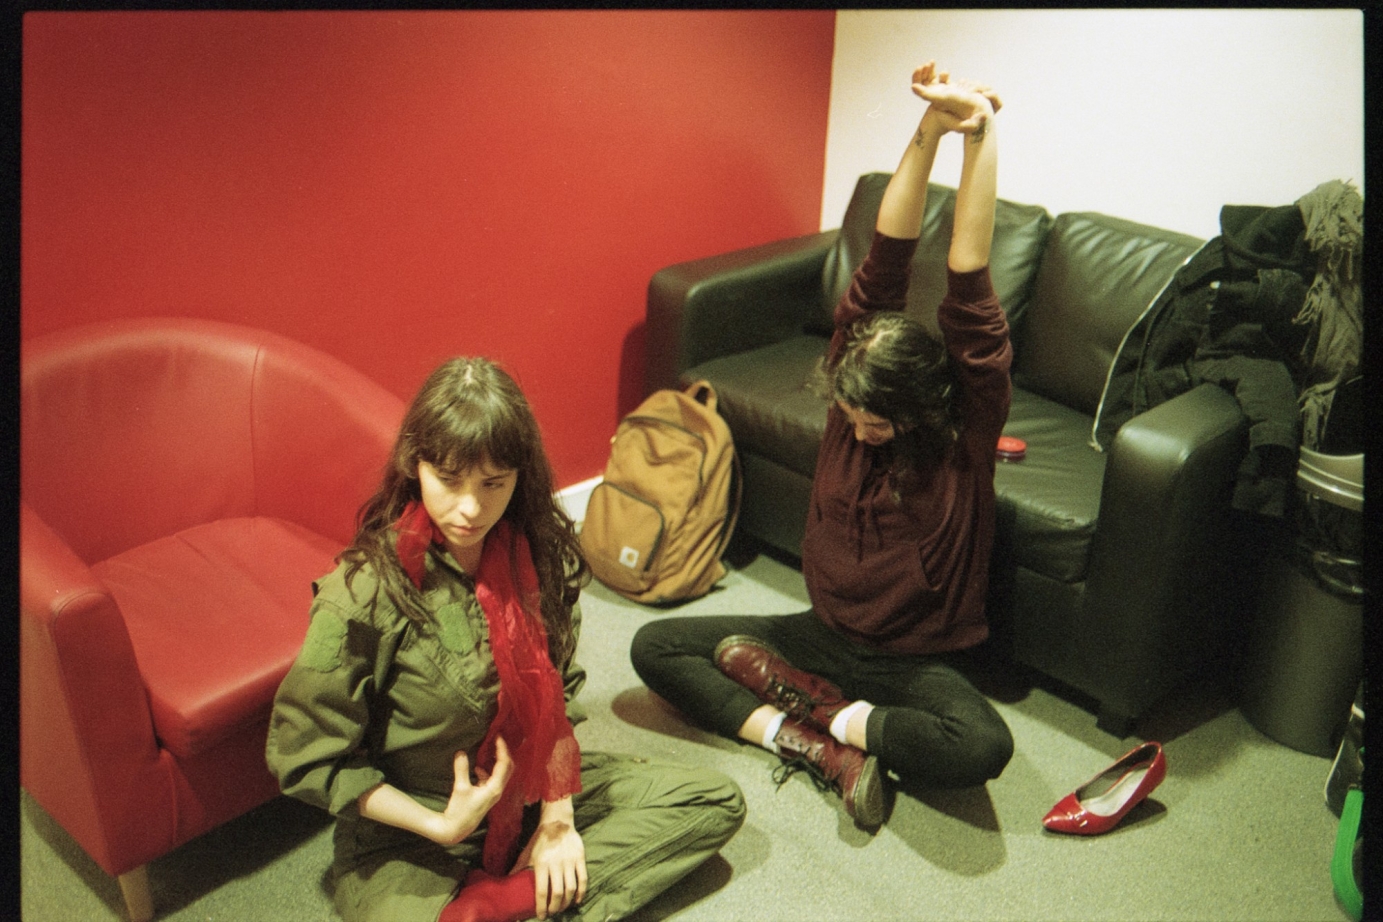 Photography for Le Butcherettes by Andy Sawyer